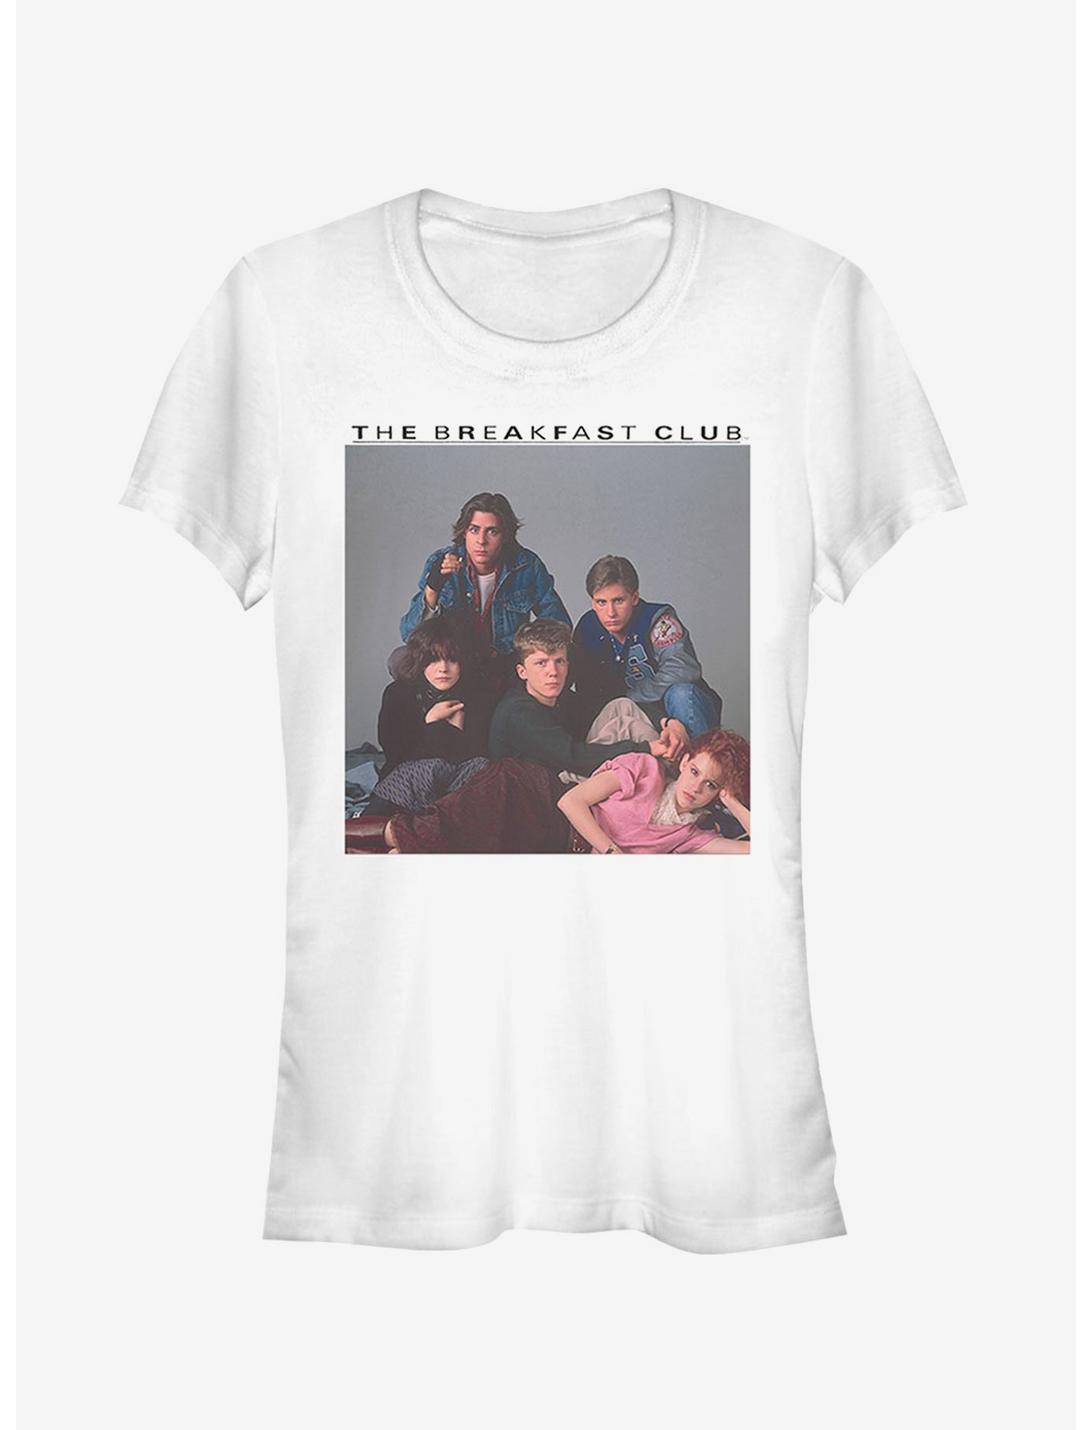 The Breakfast Club Detention Group Pose Girls T-Shirt, WHITE, hi-res